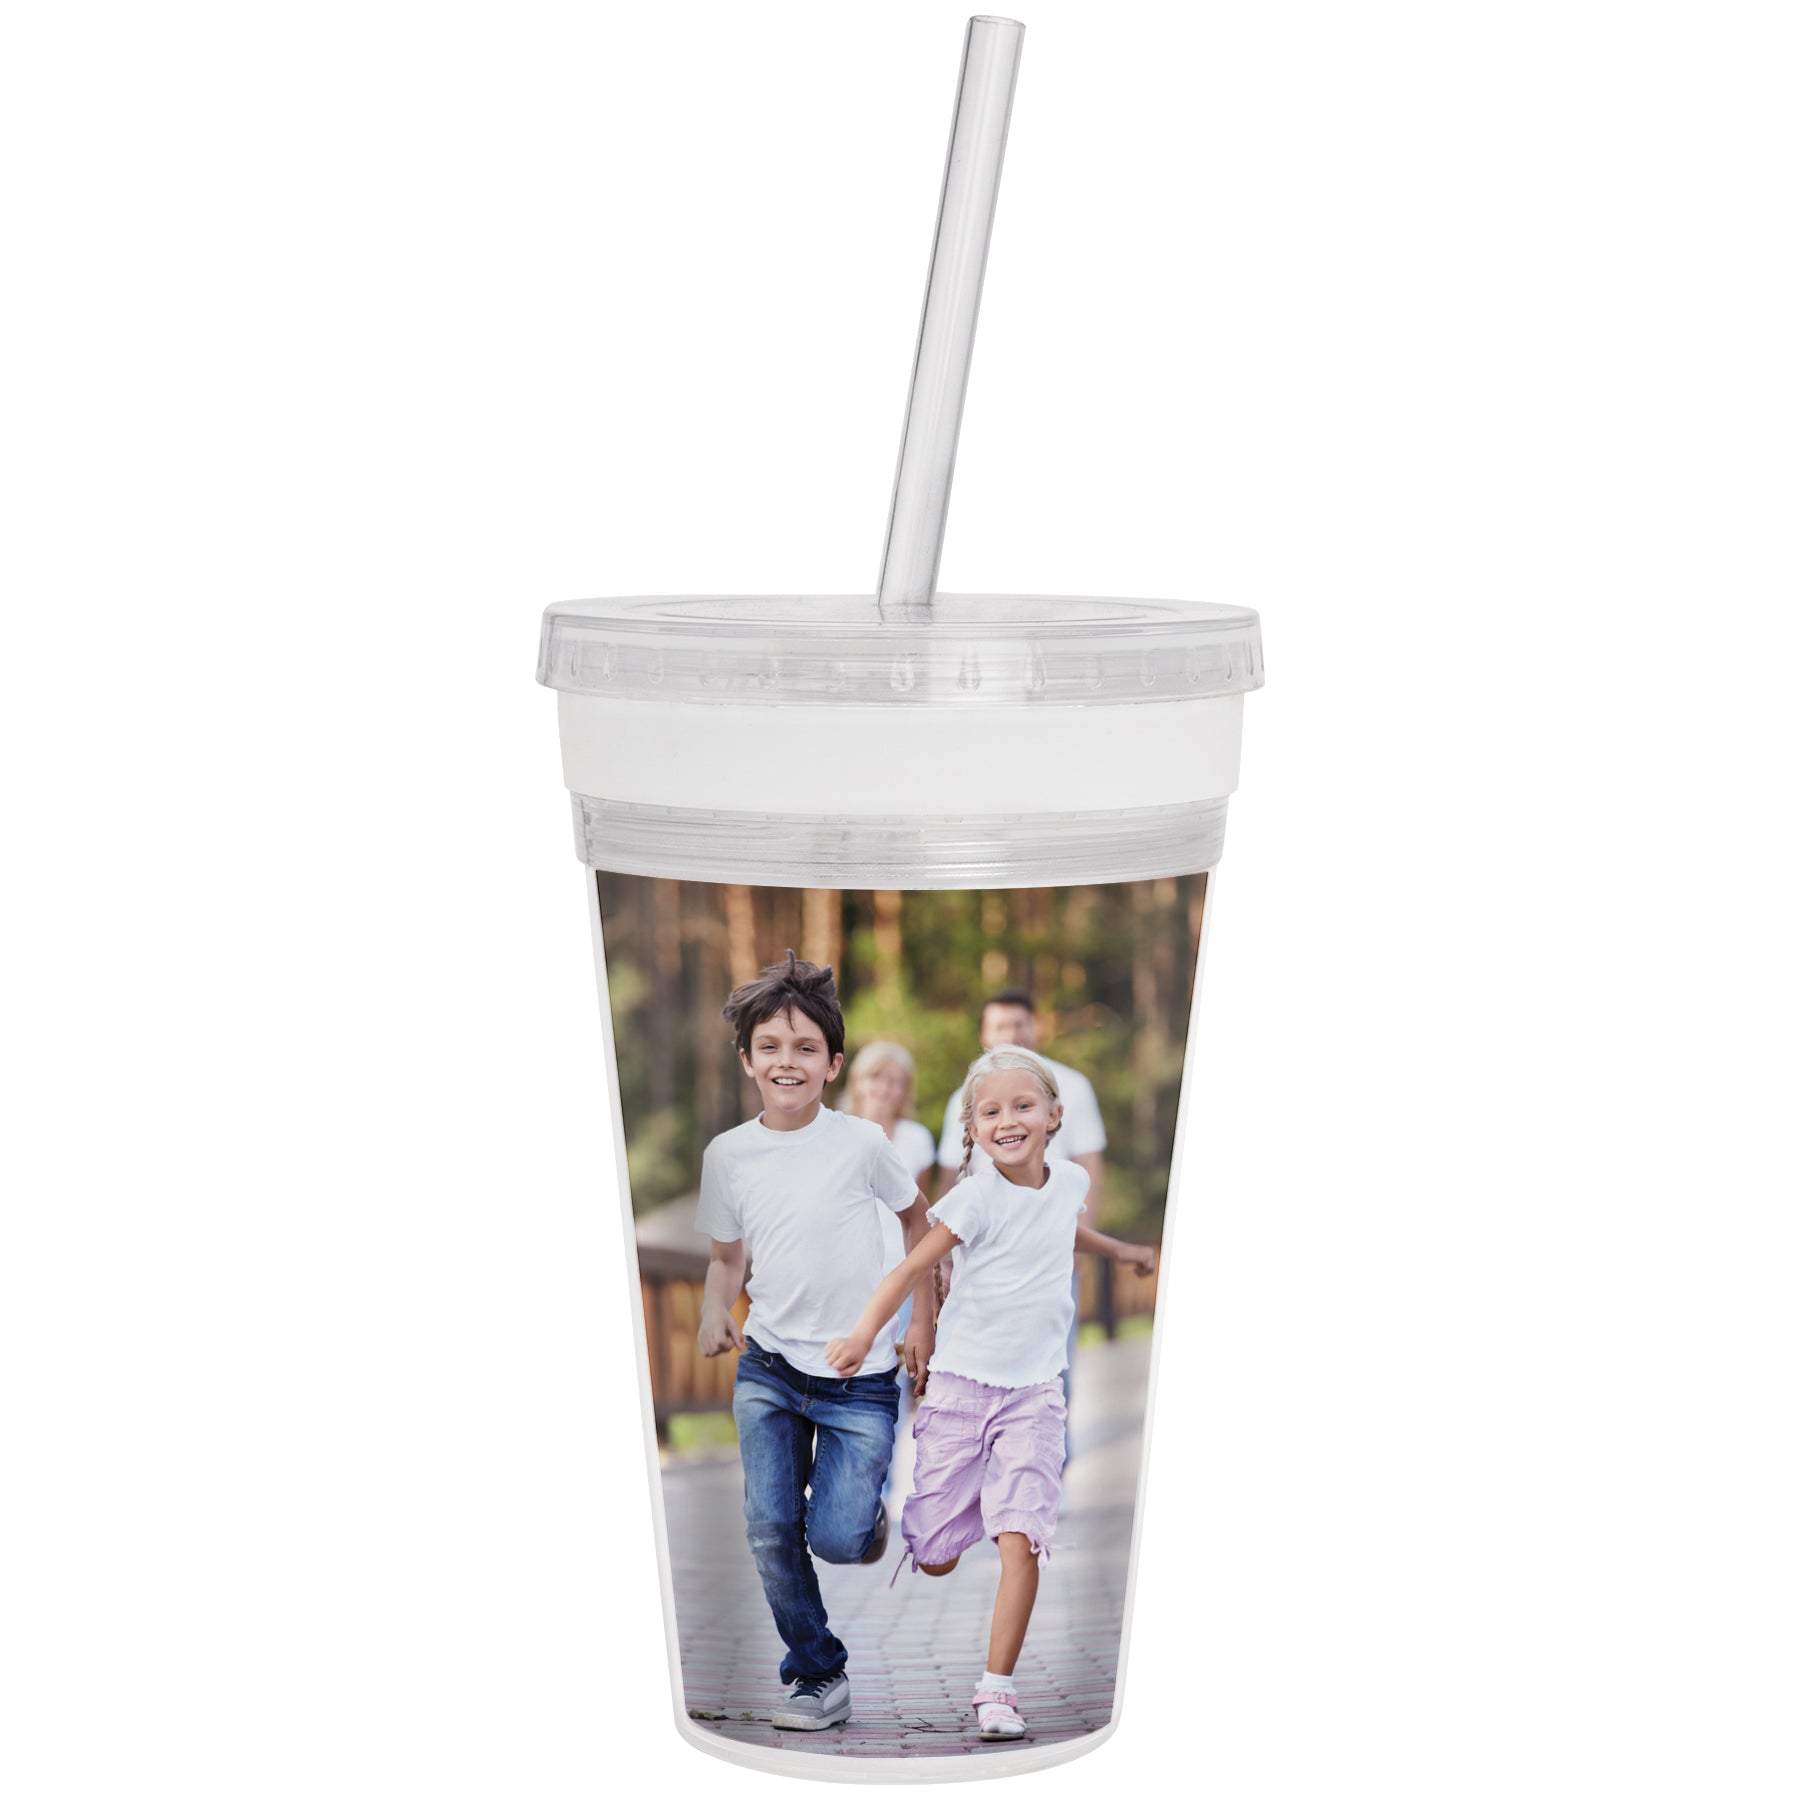 16 oz. Acrylic Tumbler with Straw  INSERTS FROM TOP